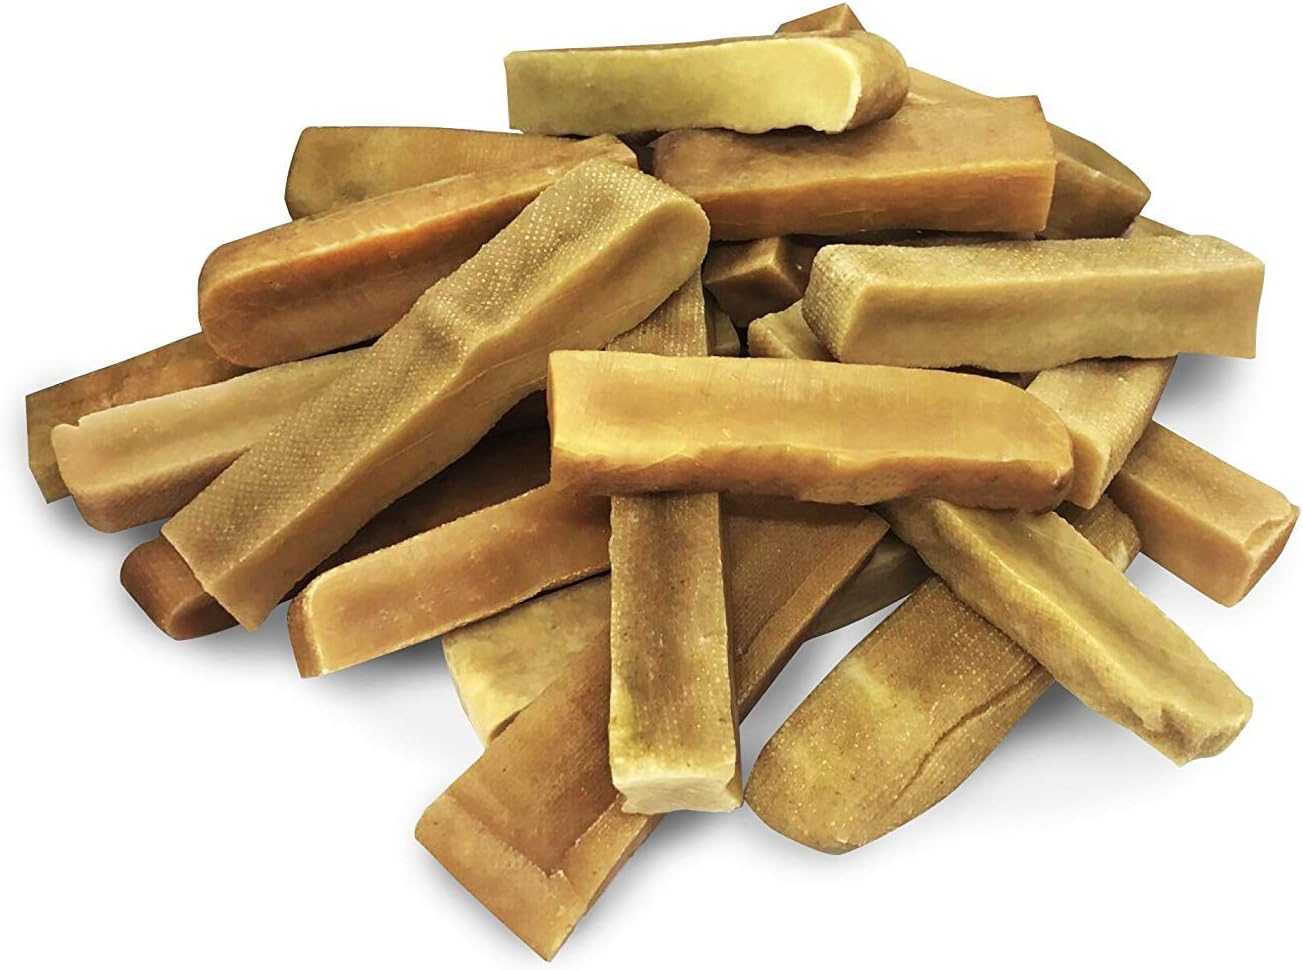 EcoKind Himalayan Gold Yak Cheese Dog Chew for Small Dogs, Healthy Dog Treats, Odorless, Long Lasting Dog Bones for Dogs, Rawhide Free, Made in The Himalayans, Small (Pack of 4) : Pet Supplies